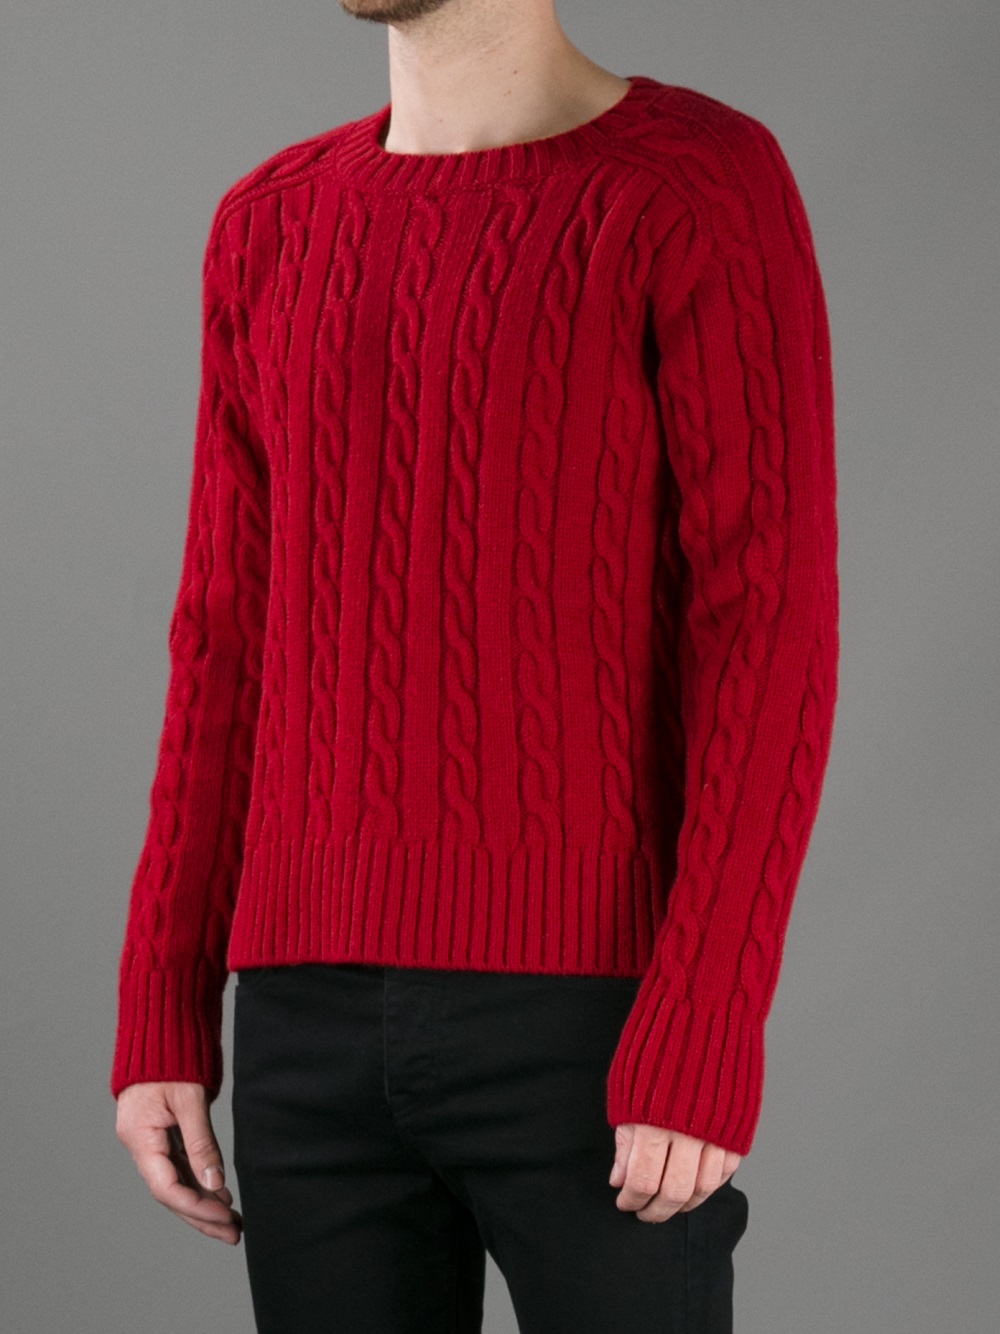 Saint Laurent Cable Knit Sweater in Red for Men - Lyst